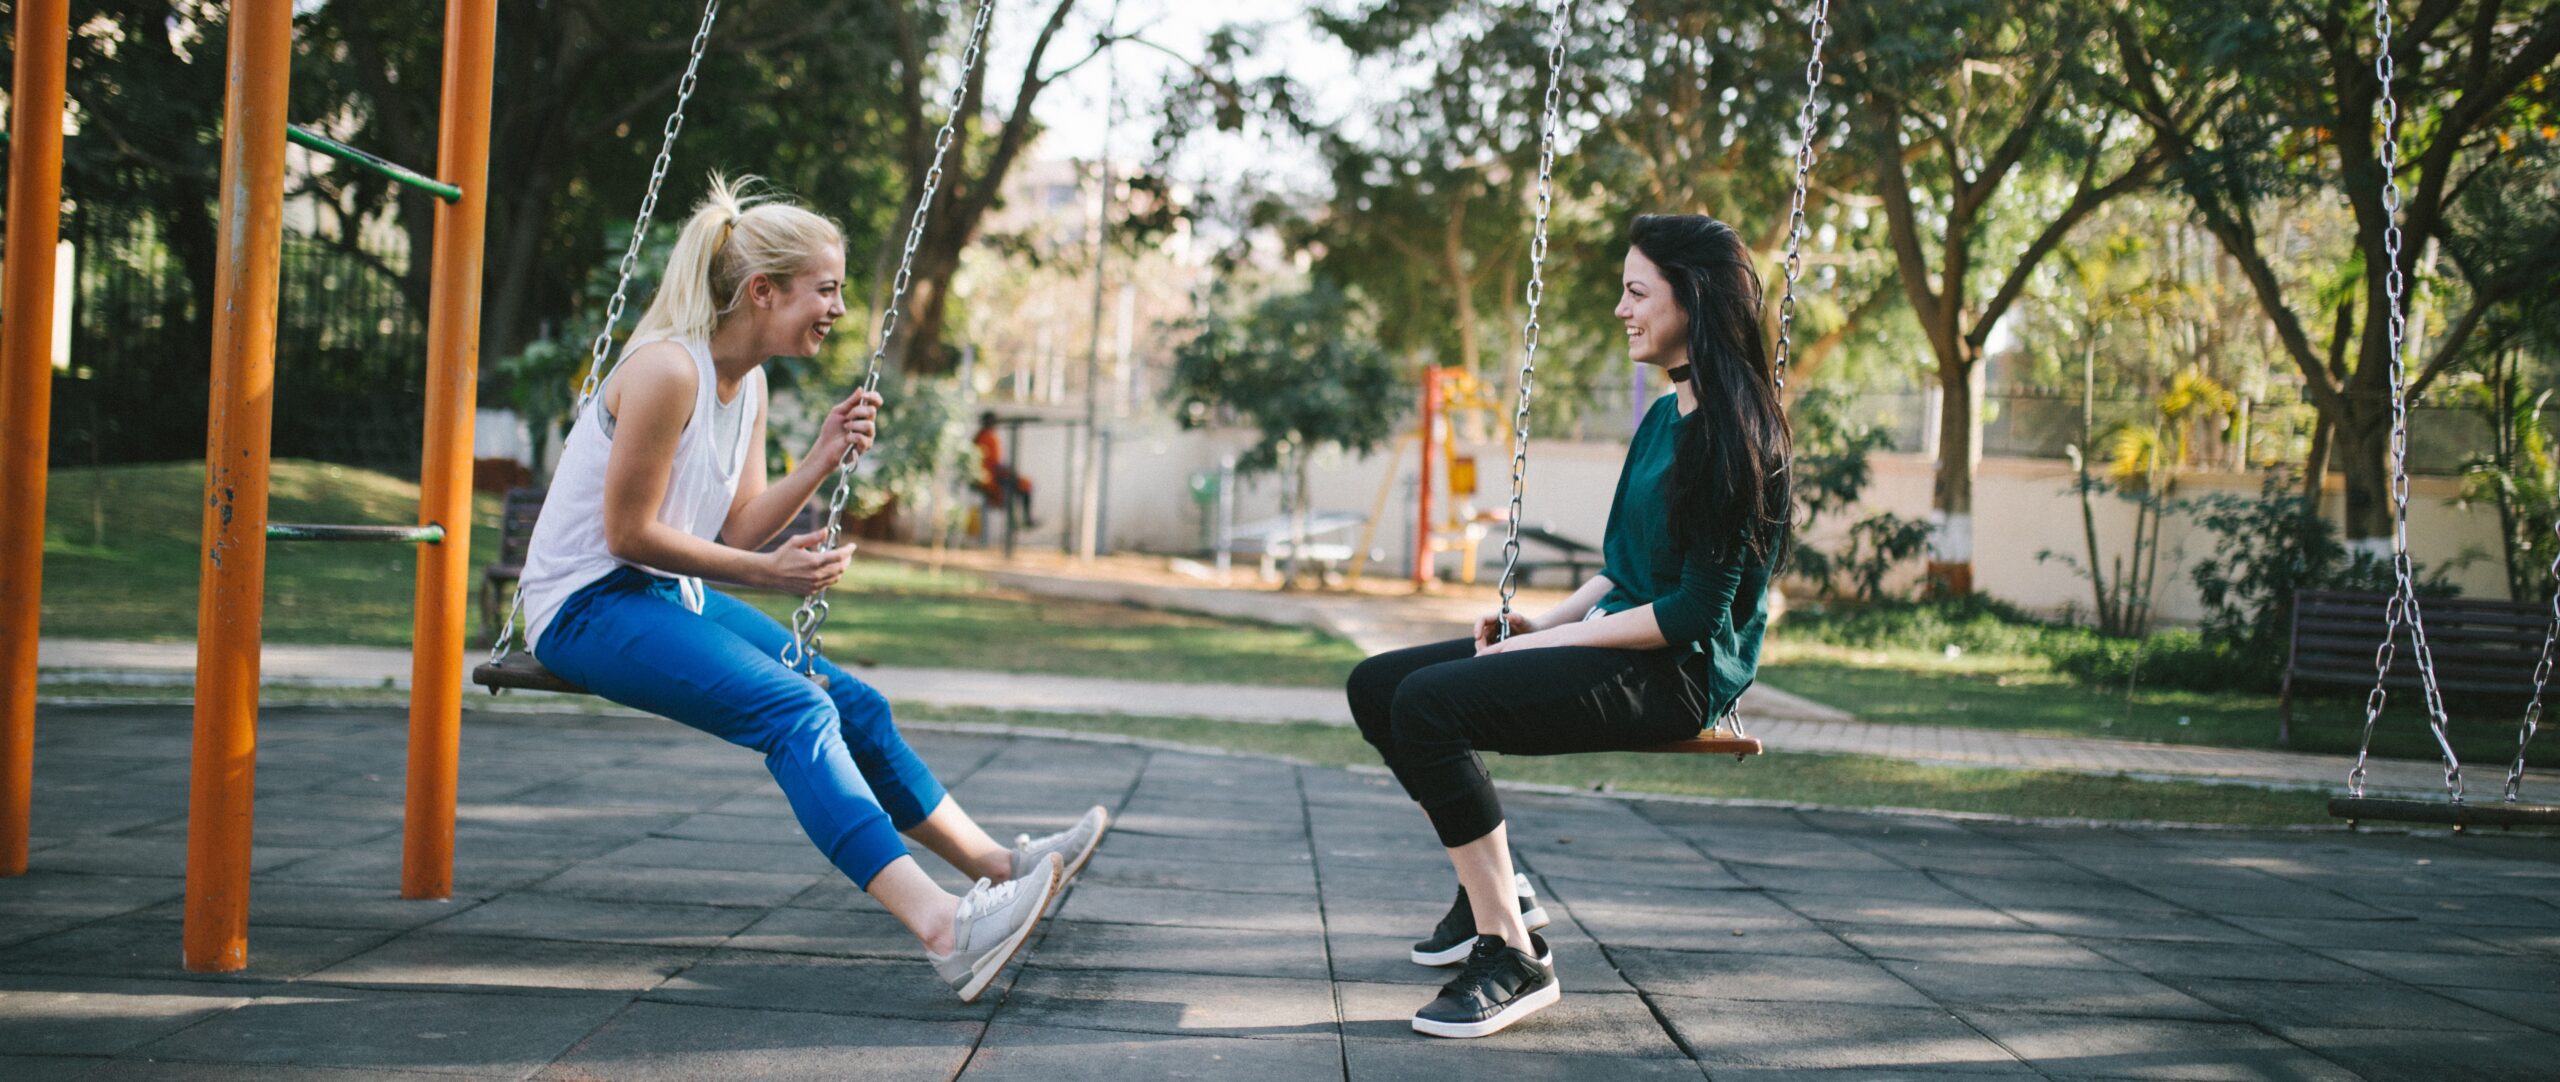 Two young people sit facing each other on a swing